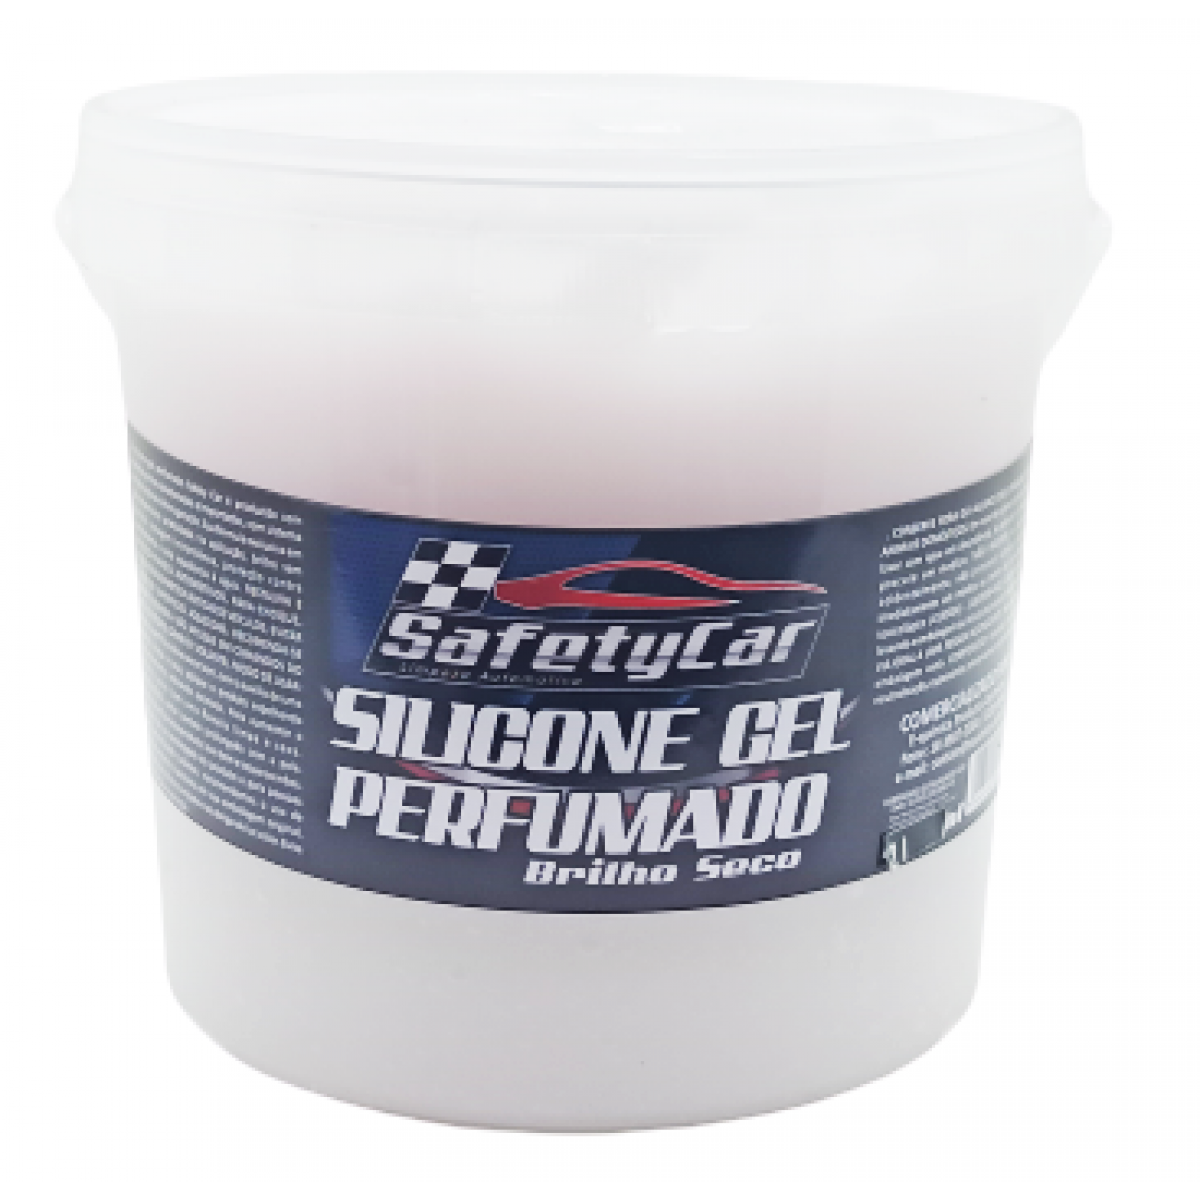 https://equimica.com.br/media/catalog/product/cache/1/image/1200x1200/85e4522595efc69f496374d01ef2bf13/s/i/silicone_gel_safety_car_2_lts_-_r_55_00_1.png